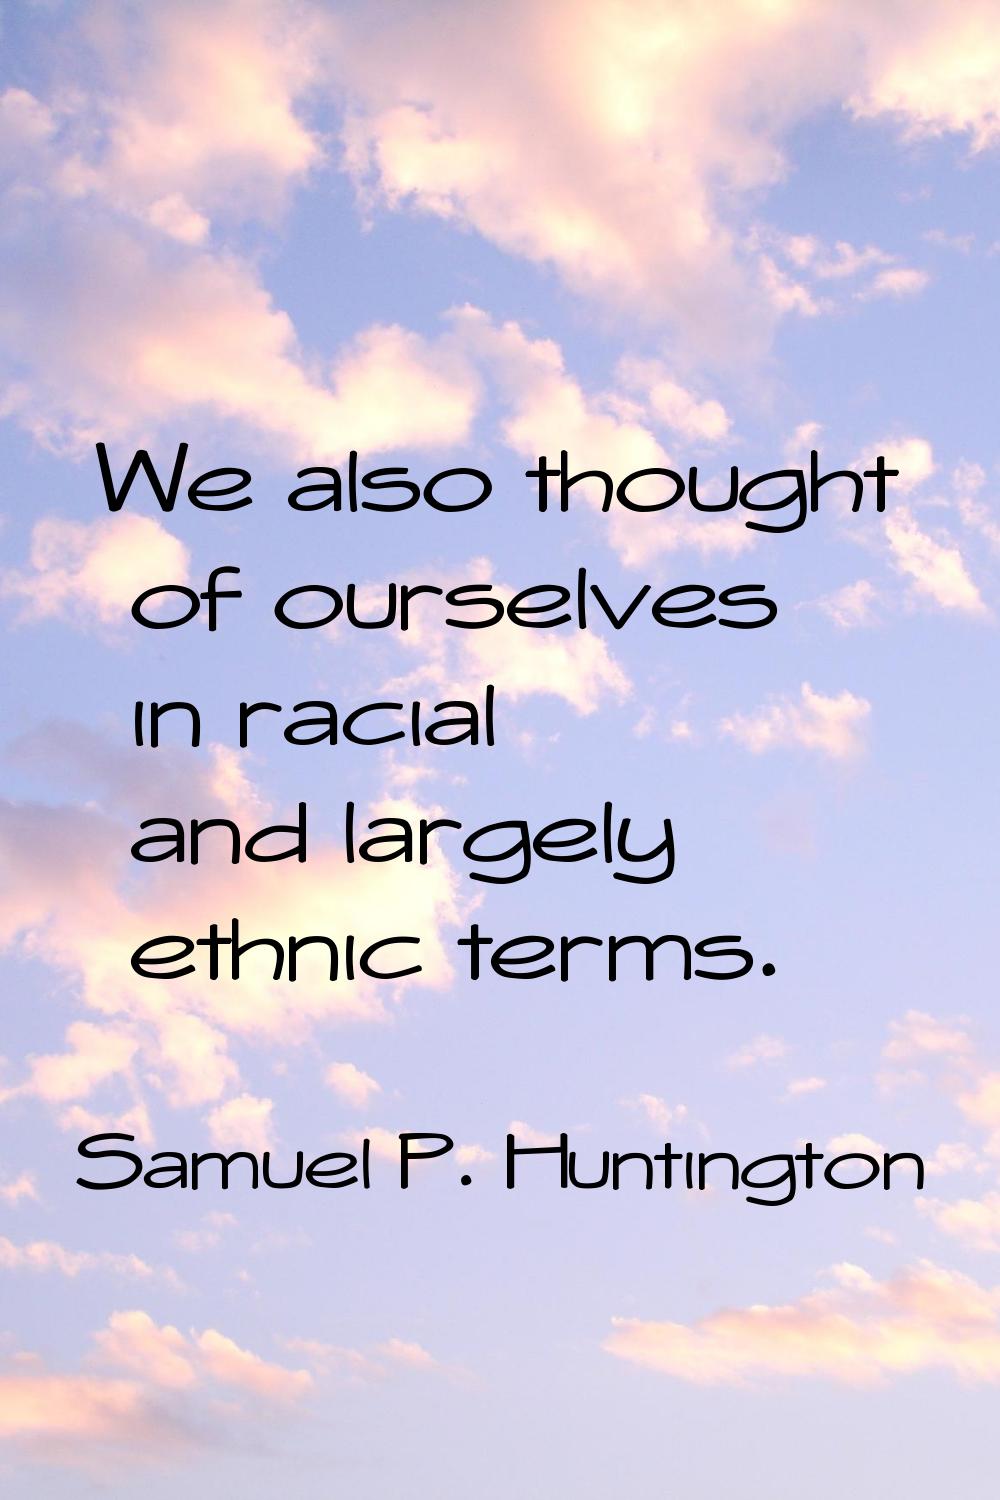 We also thought of ourselves in racial and largely ethnic terms.